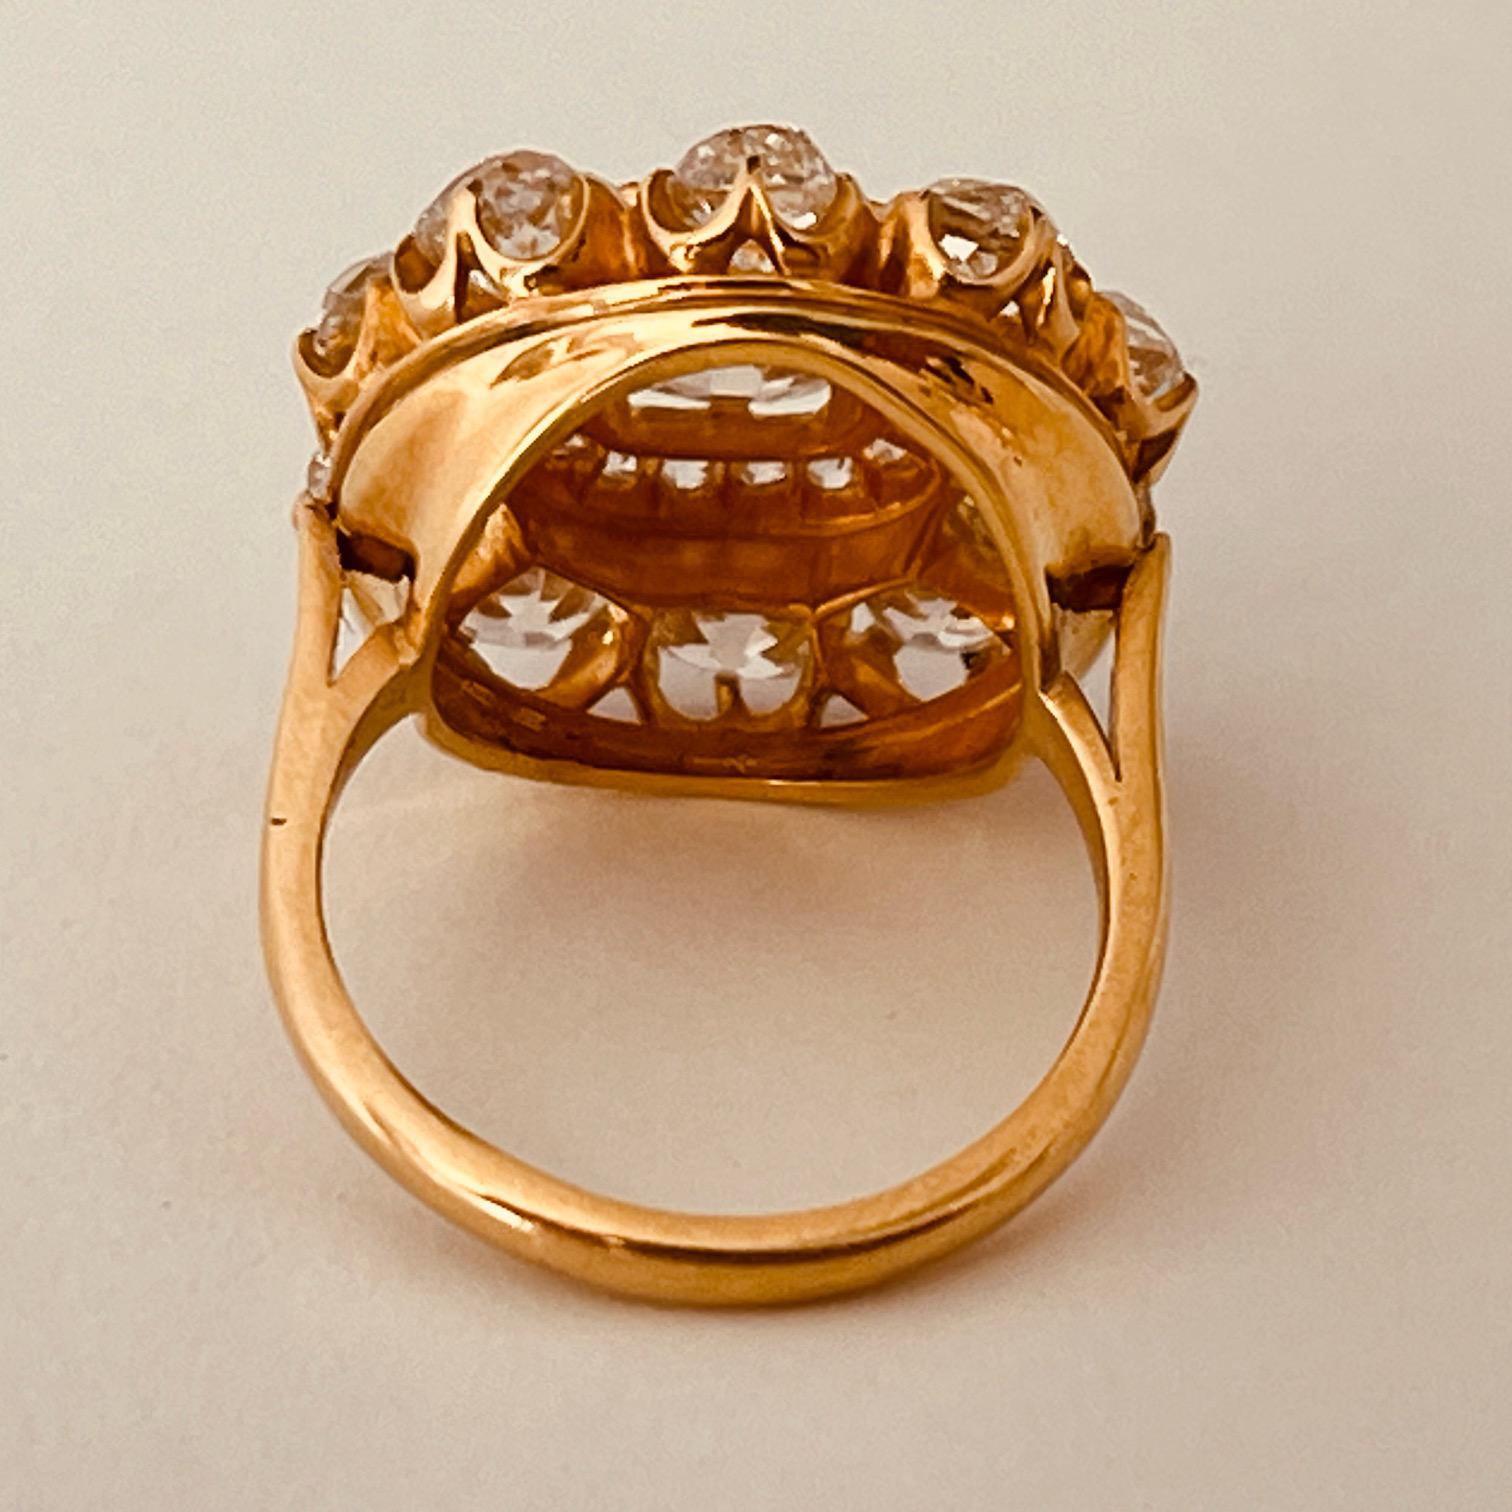 Antique Diamonds Cluster Ring With Central Old-Cut Cushion Weighing 1.35cts For Sale 8